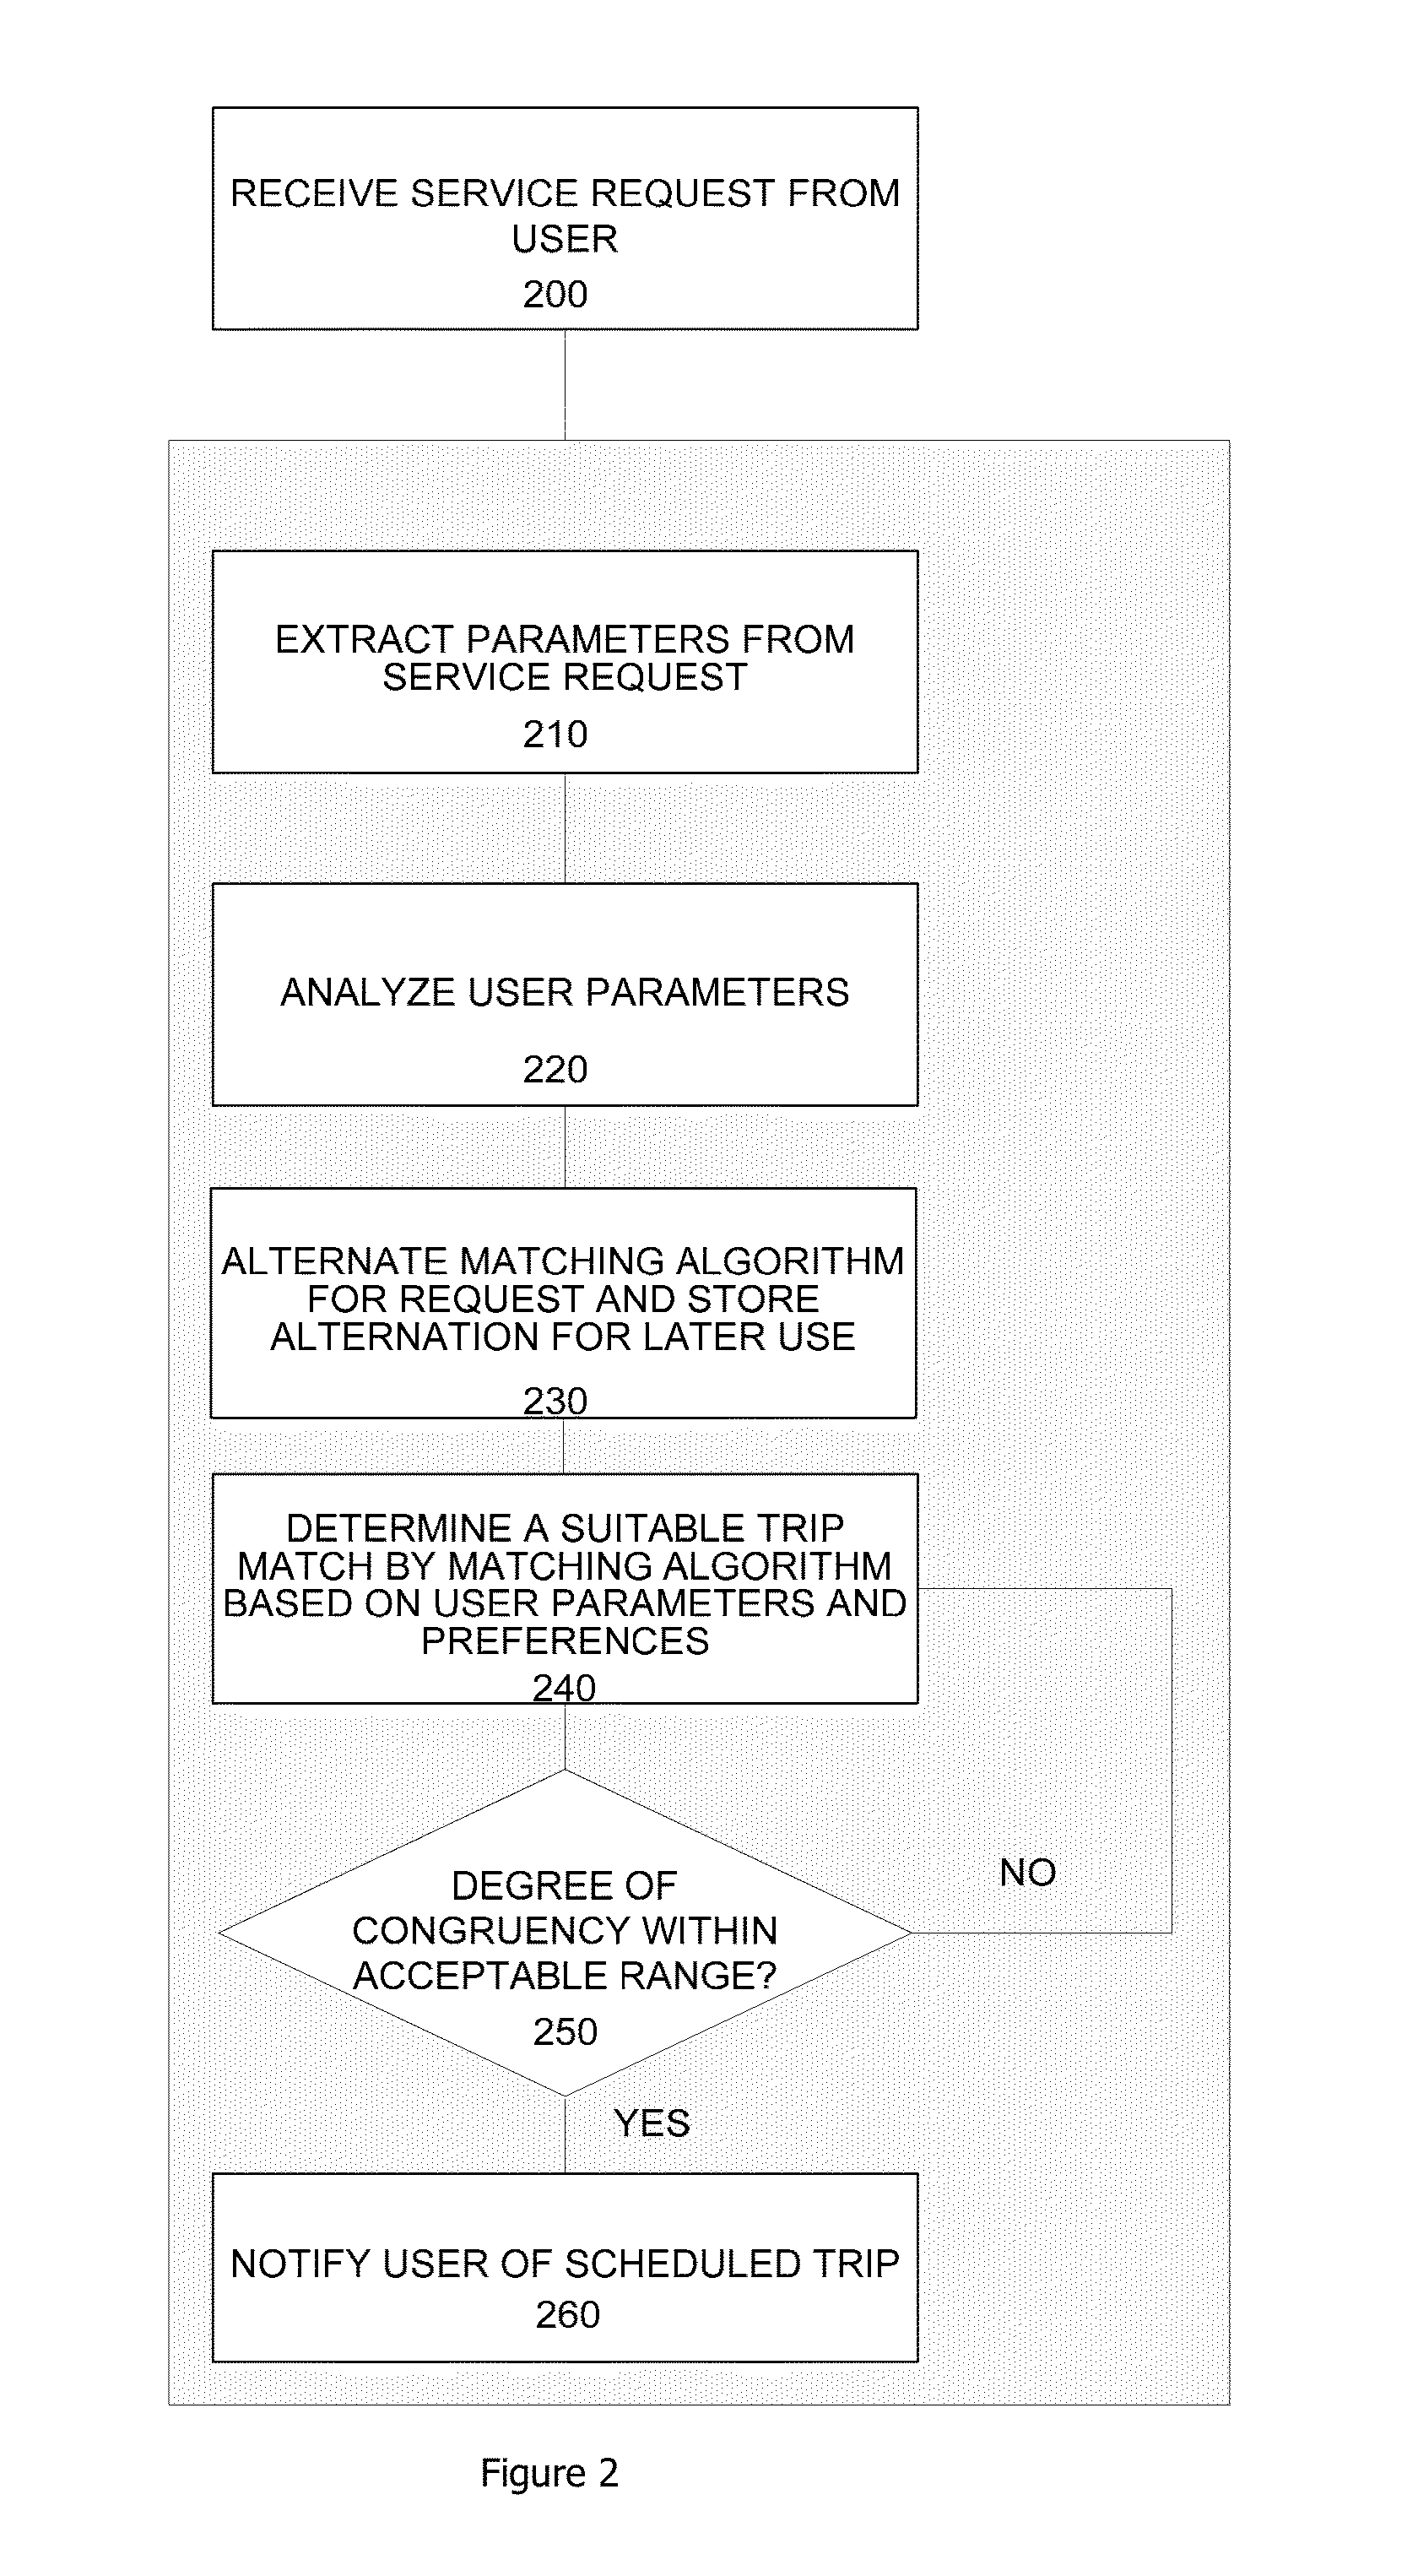 System and method for employing self-optimizing algorithms to probe and reach regions of higher customer satisfaction through altered system parameters on survey results